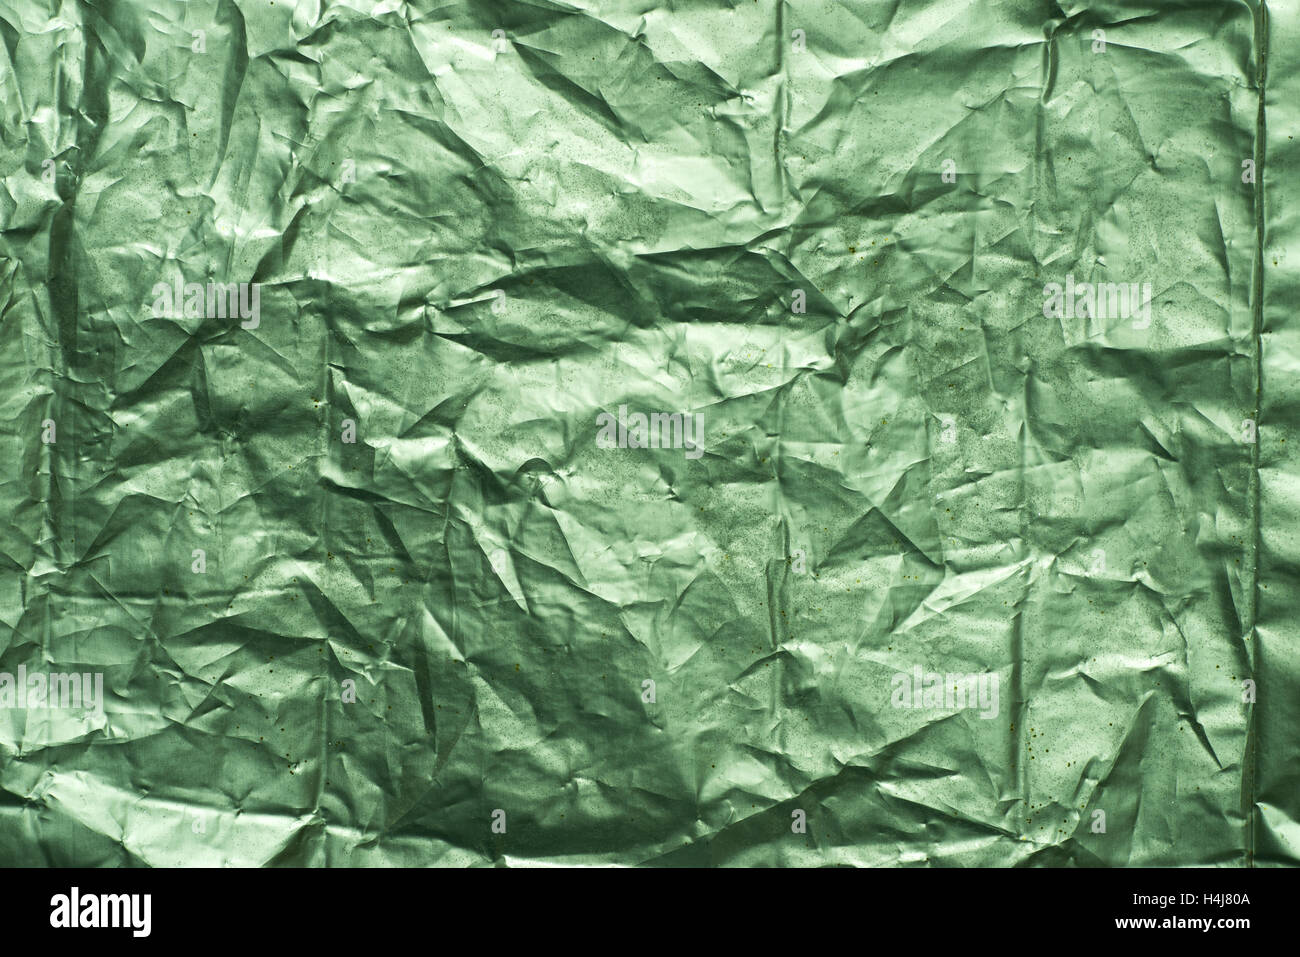 green weathered creased metallic foil background texture Stock Photo